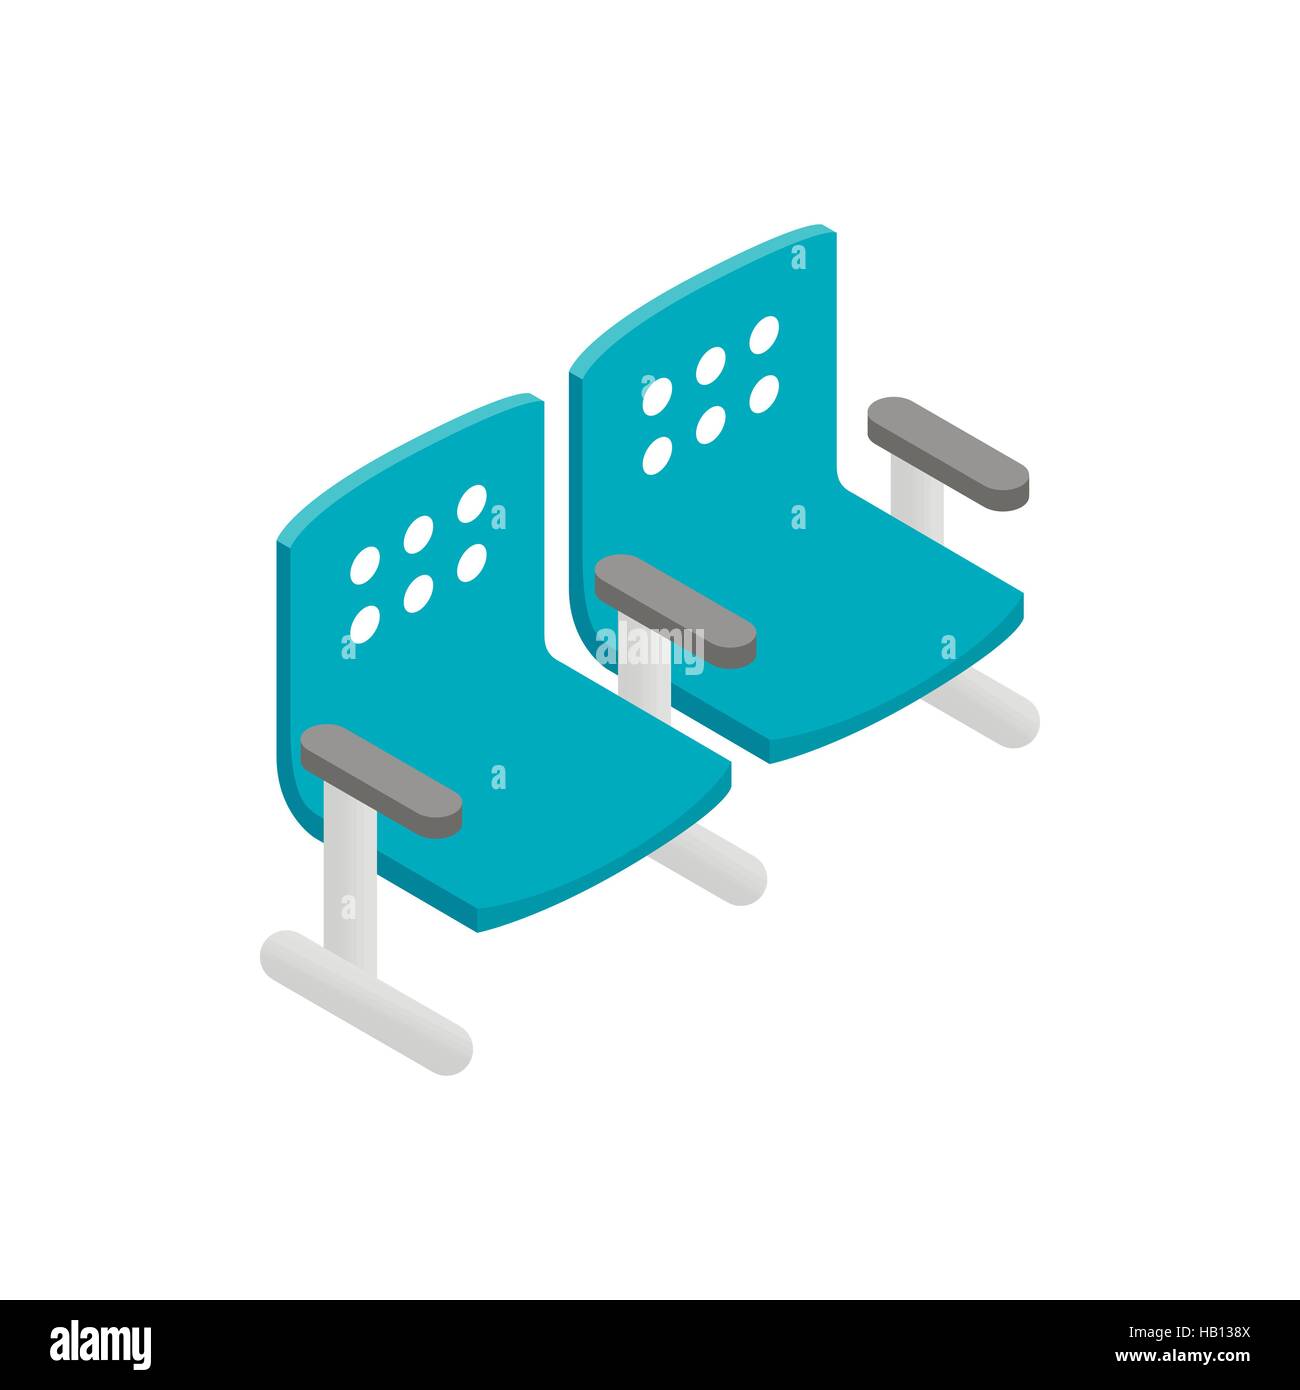 Chairs waiting area isometric 3d icon Stock Vector